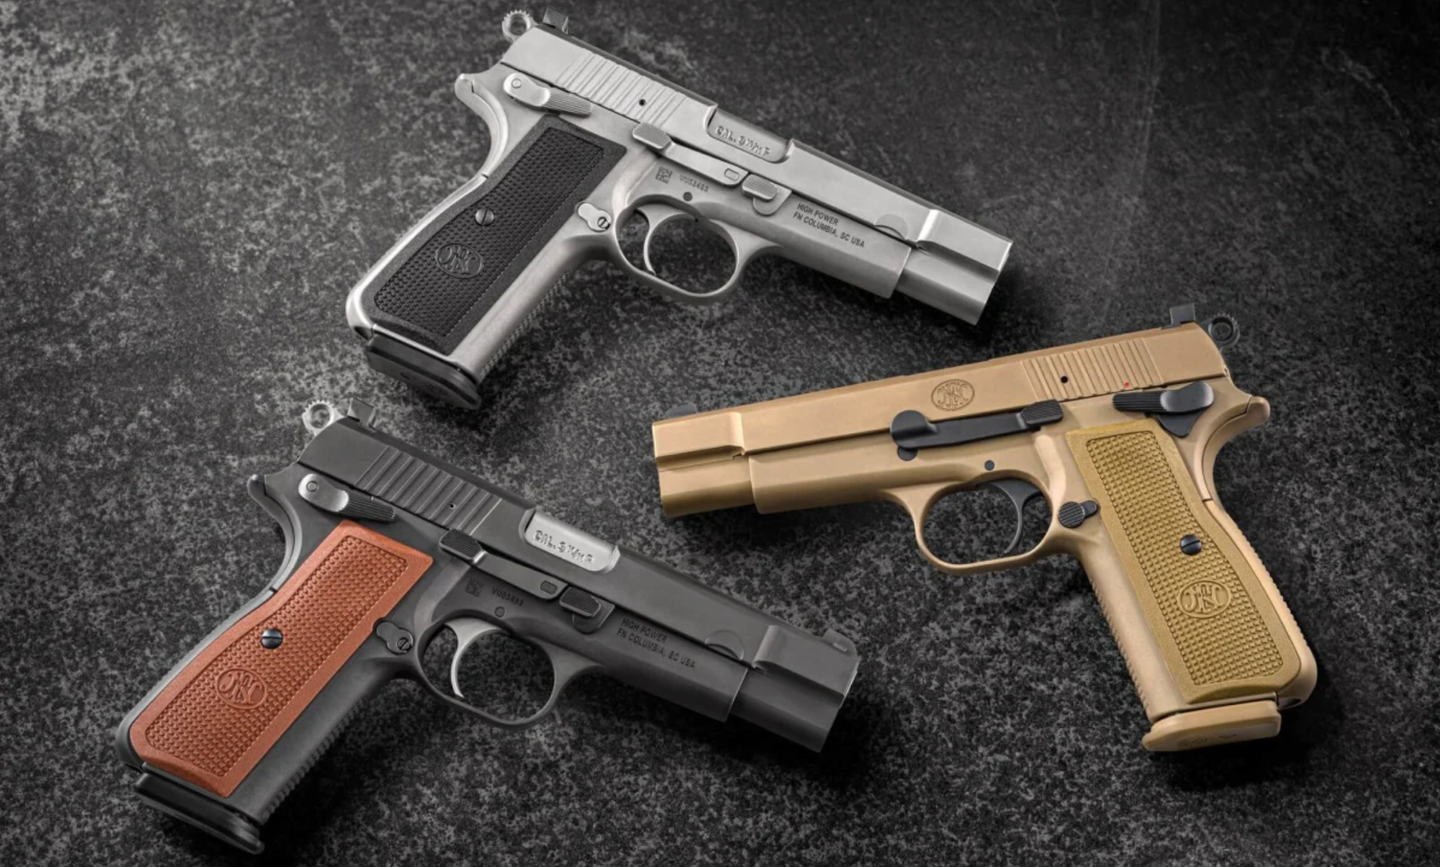 Fabrique Nationale's new 'High Power' iterations of the classic Hi-Power pistol